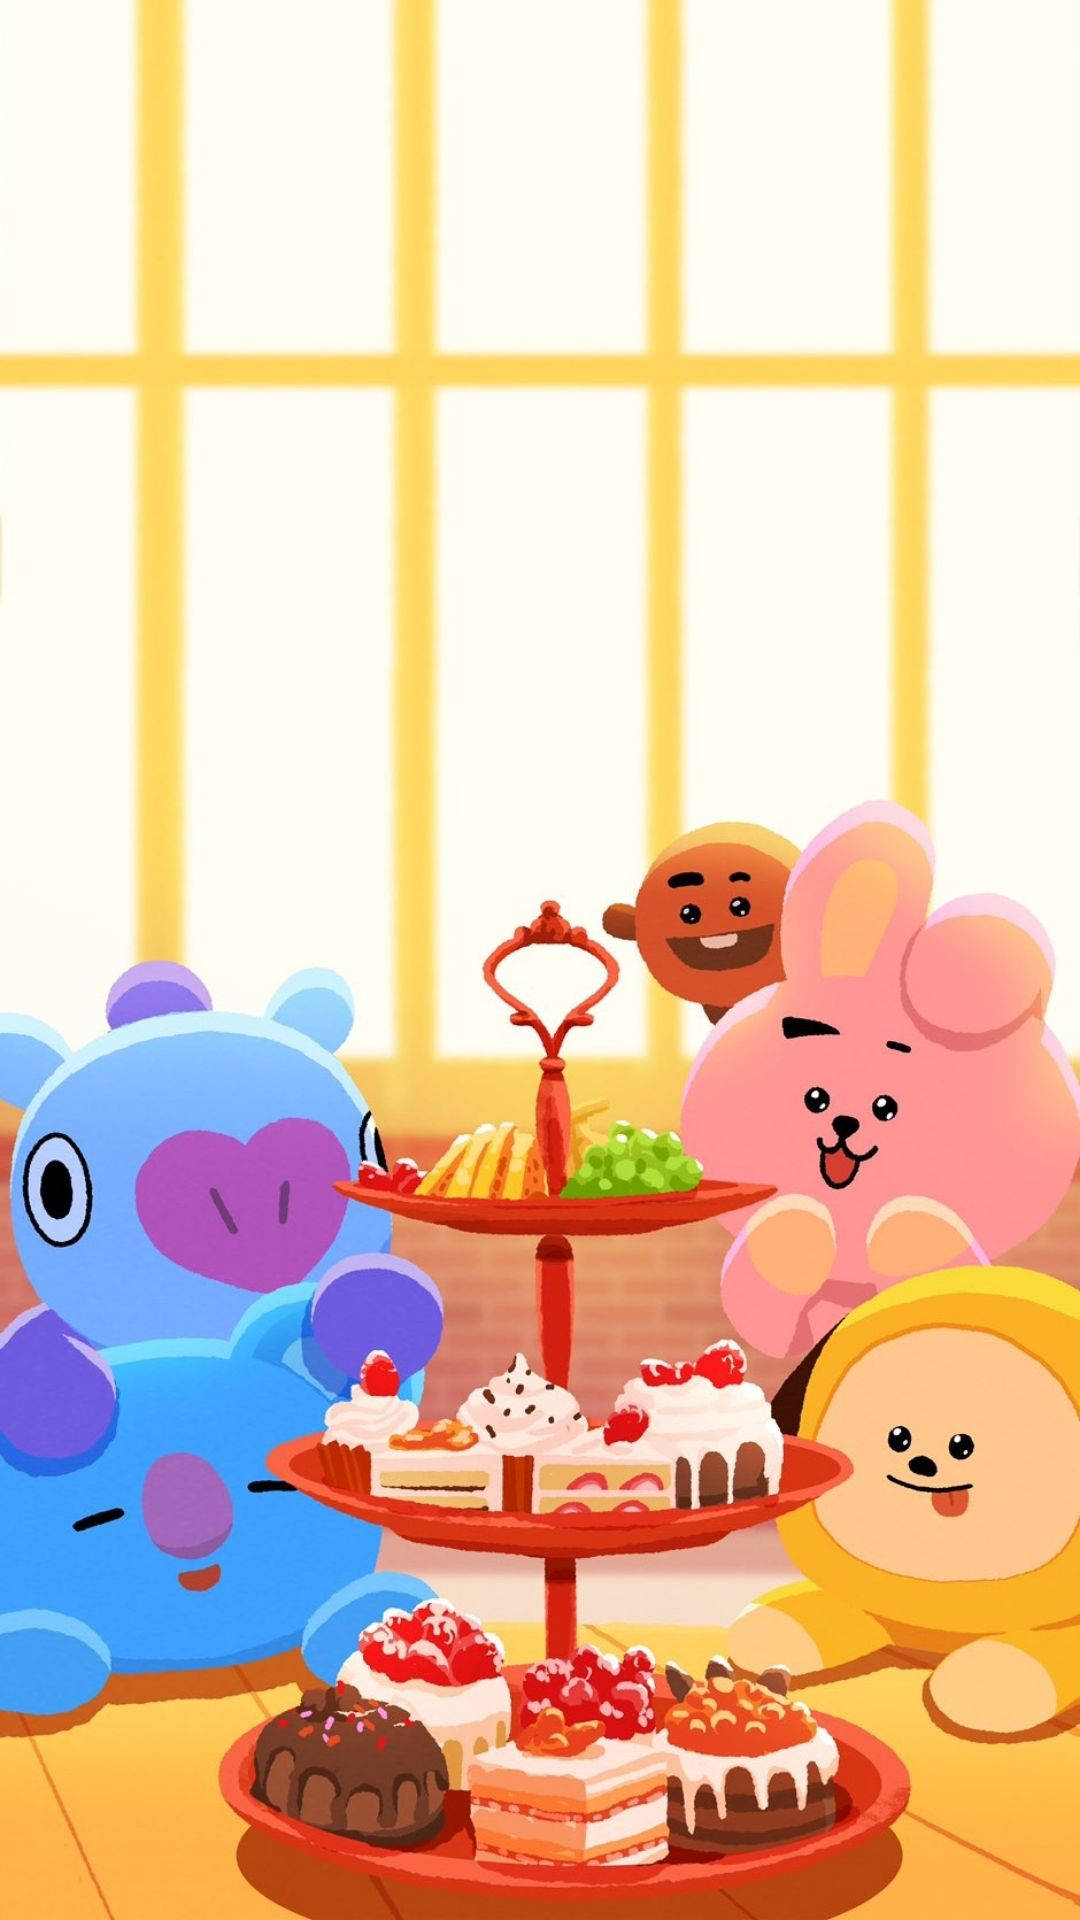 Bt21 Craving Sweets